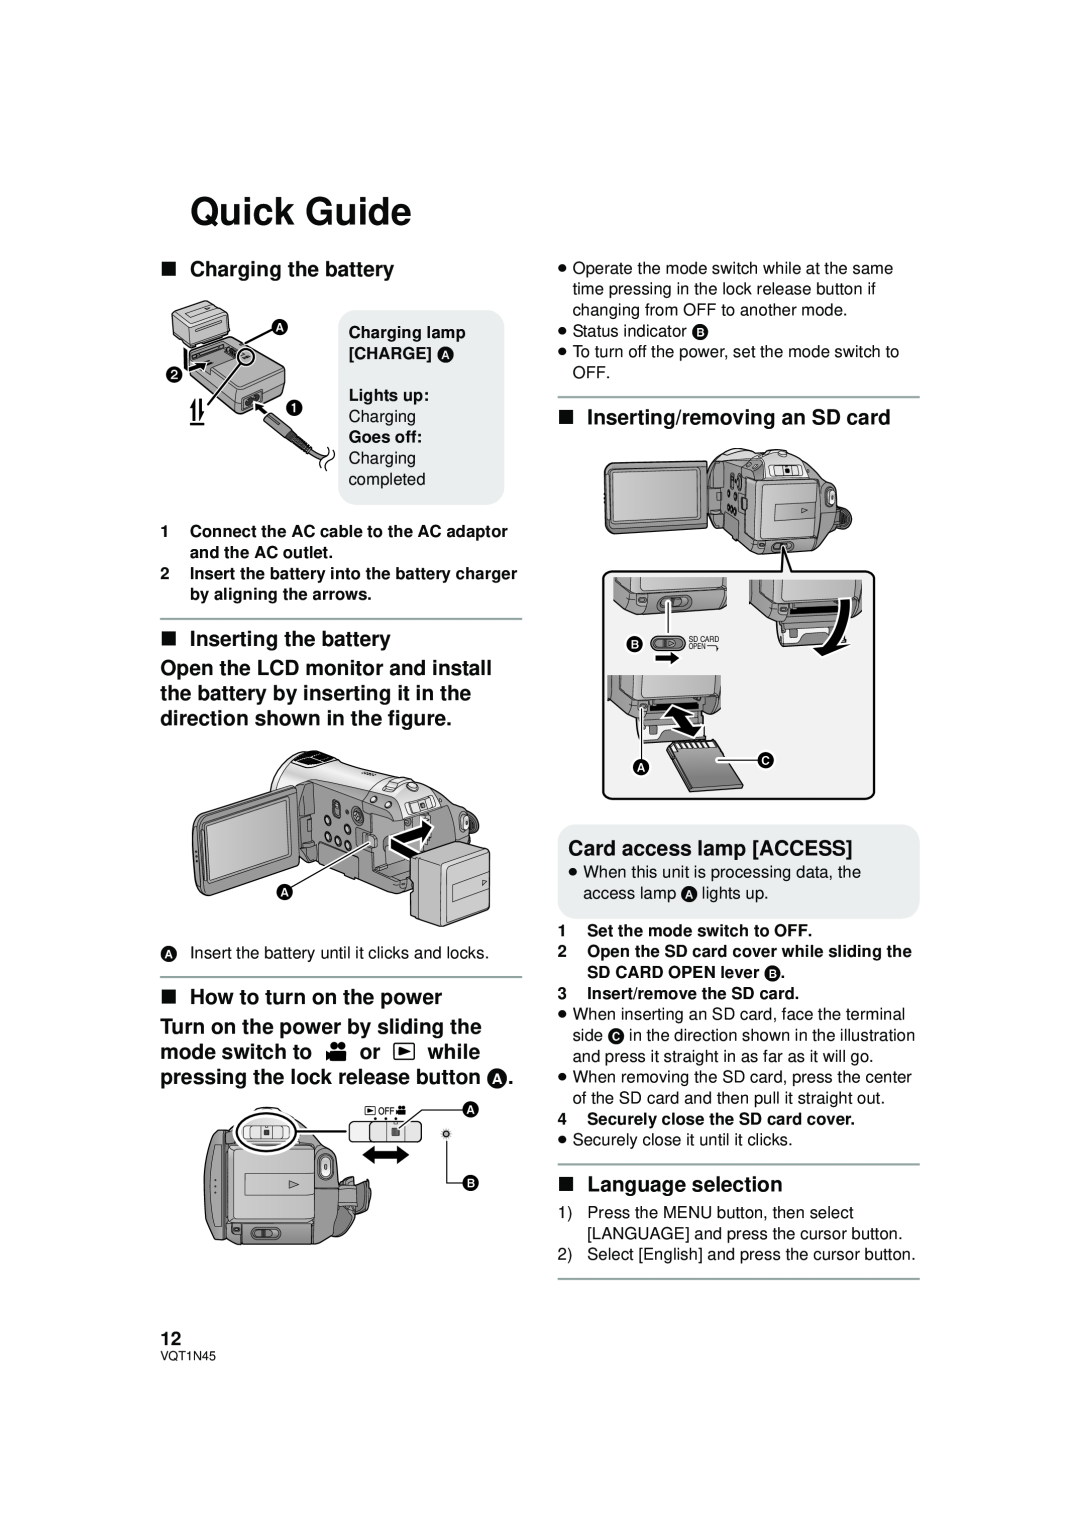 Panasonic HDC-SD9PC manual Quick Guide, ∫Charging the battery, ∫Inserting the battery, ∫How to turn on the power 